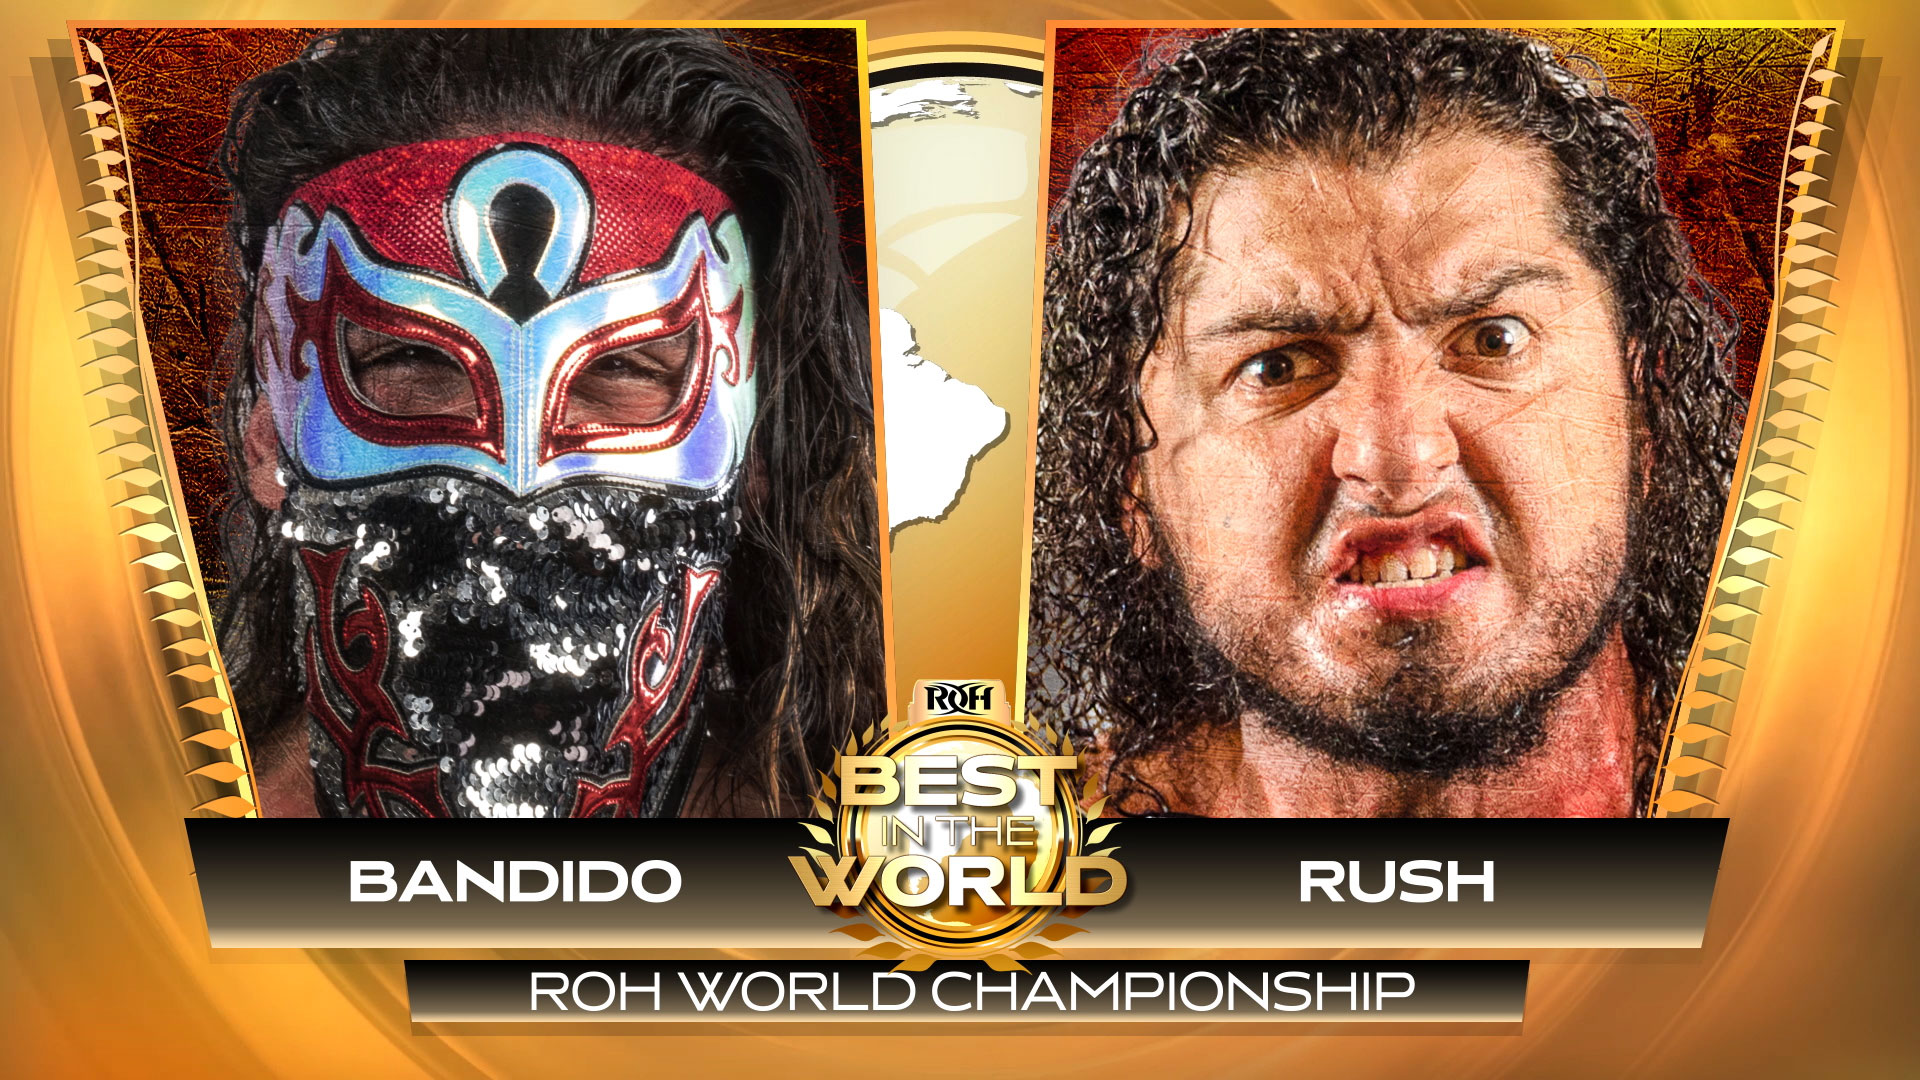 ROH Officially Confirms World Title Match For Best In The World PPV